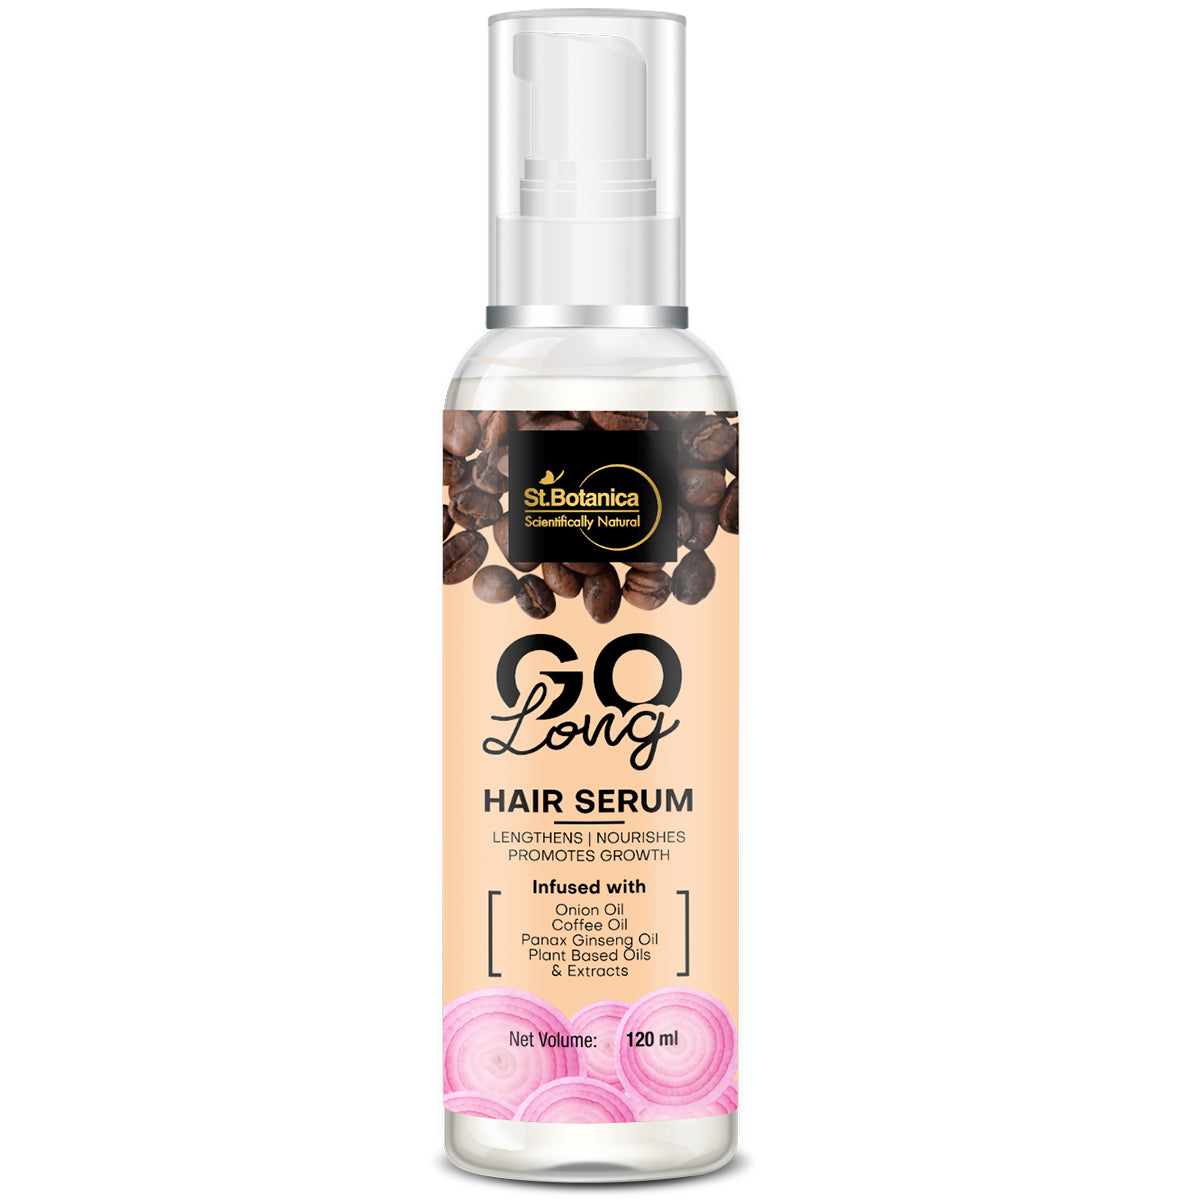 St.Botanica Go Long Onion Hair Serum - With Onion Oil, Coffee Oil, Panax Ginseng Oil For Long, Strong & Shiny Hair, 120ml